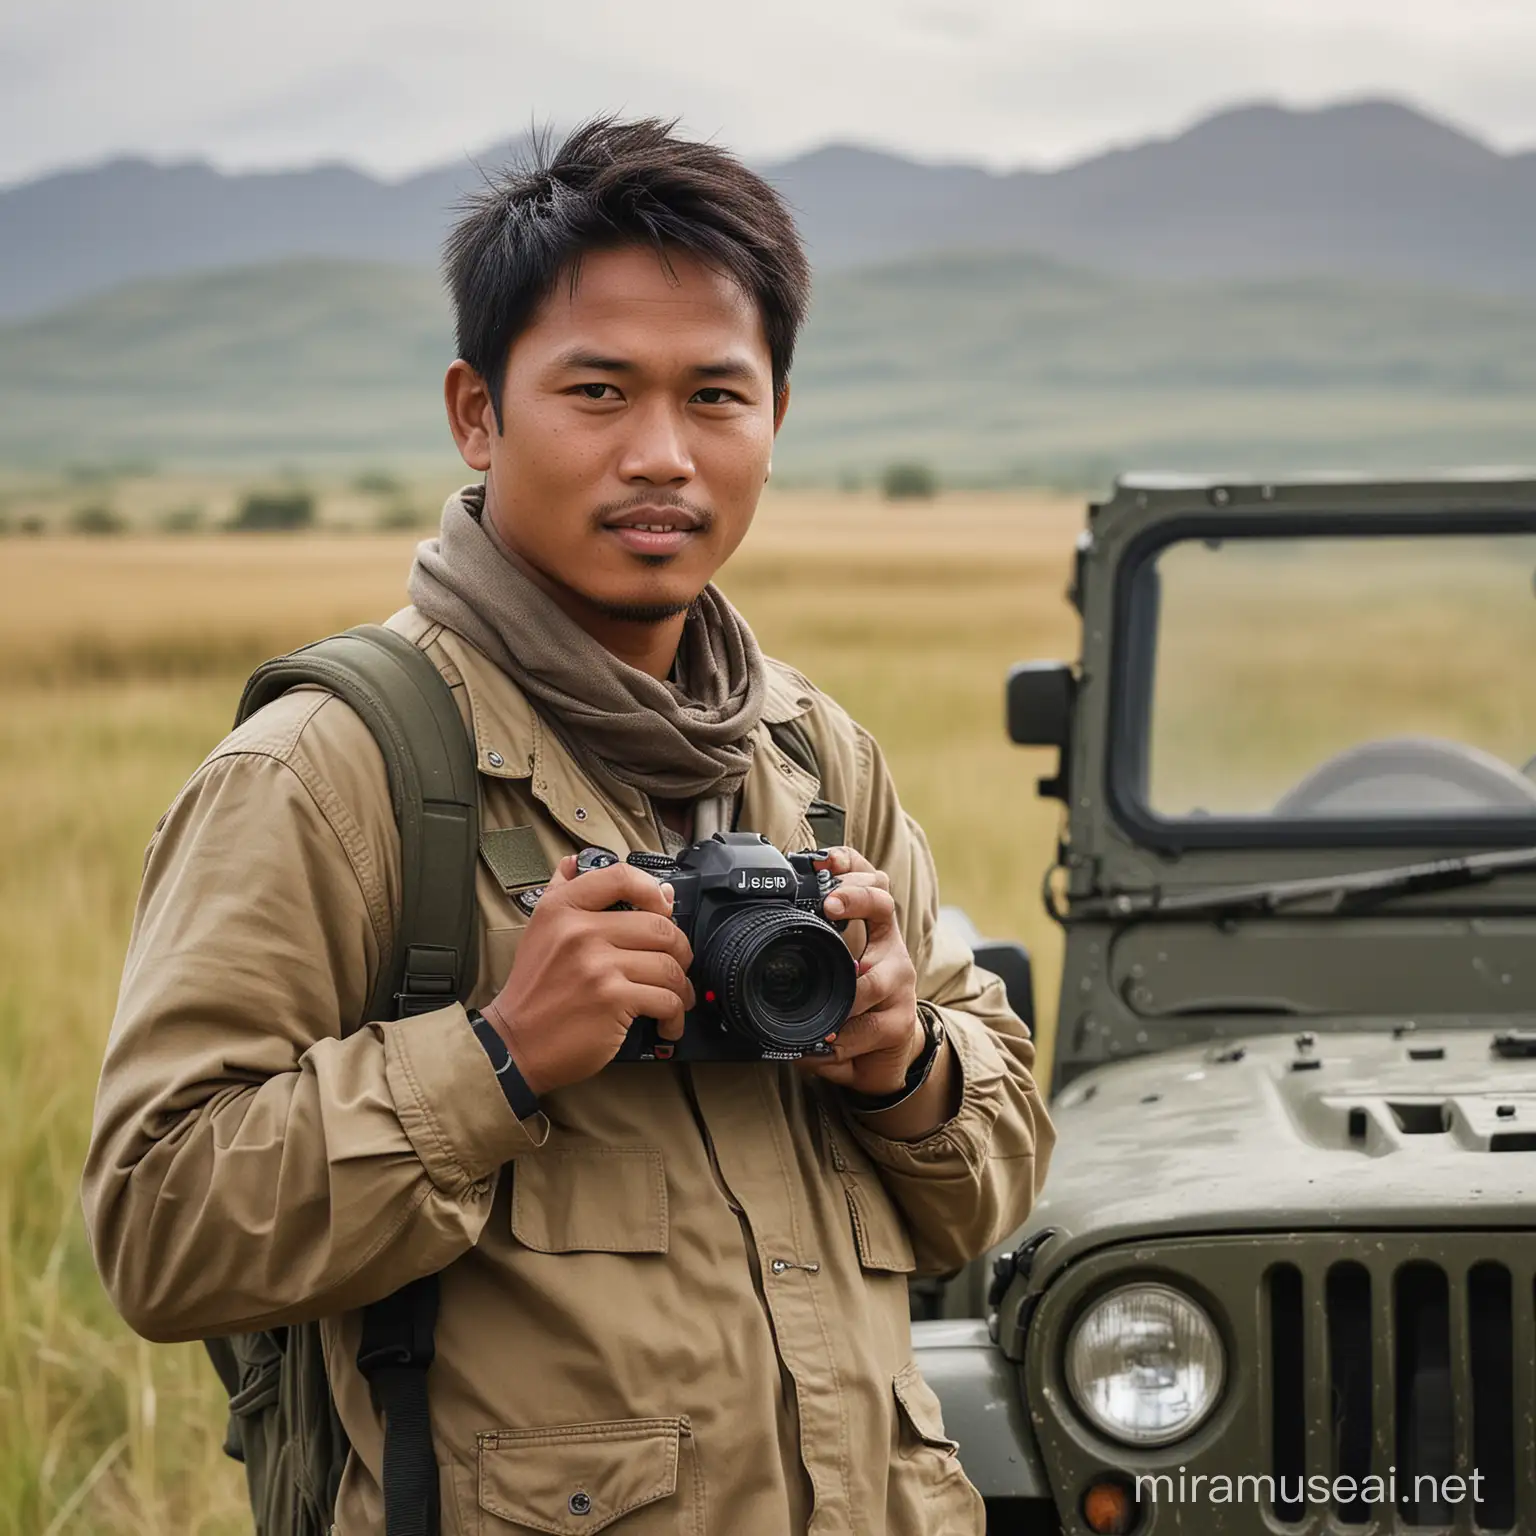 Indonesian Photographer Capturing Wilderness Beauty with Telephoto Lens